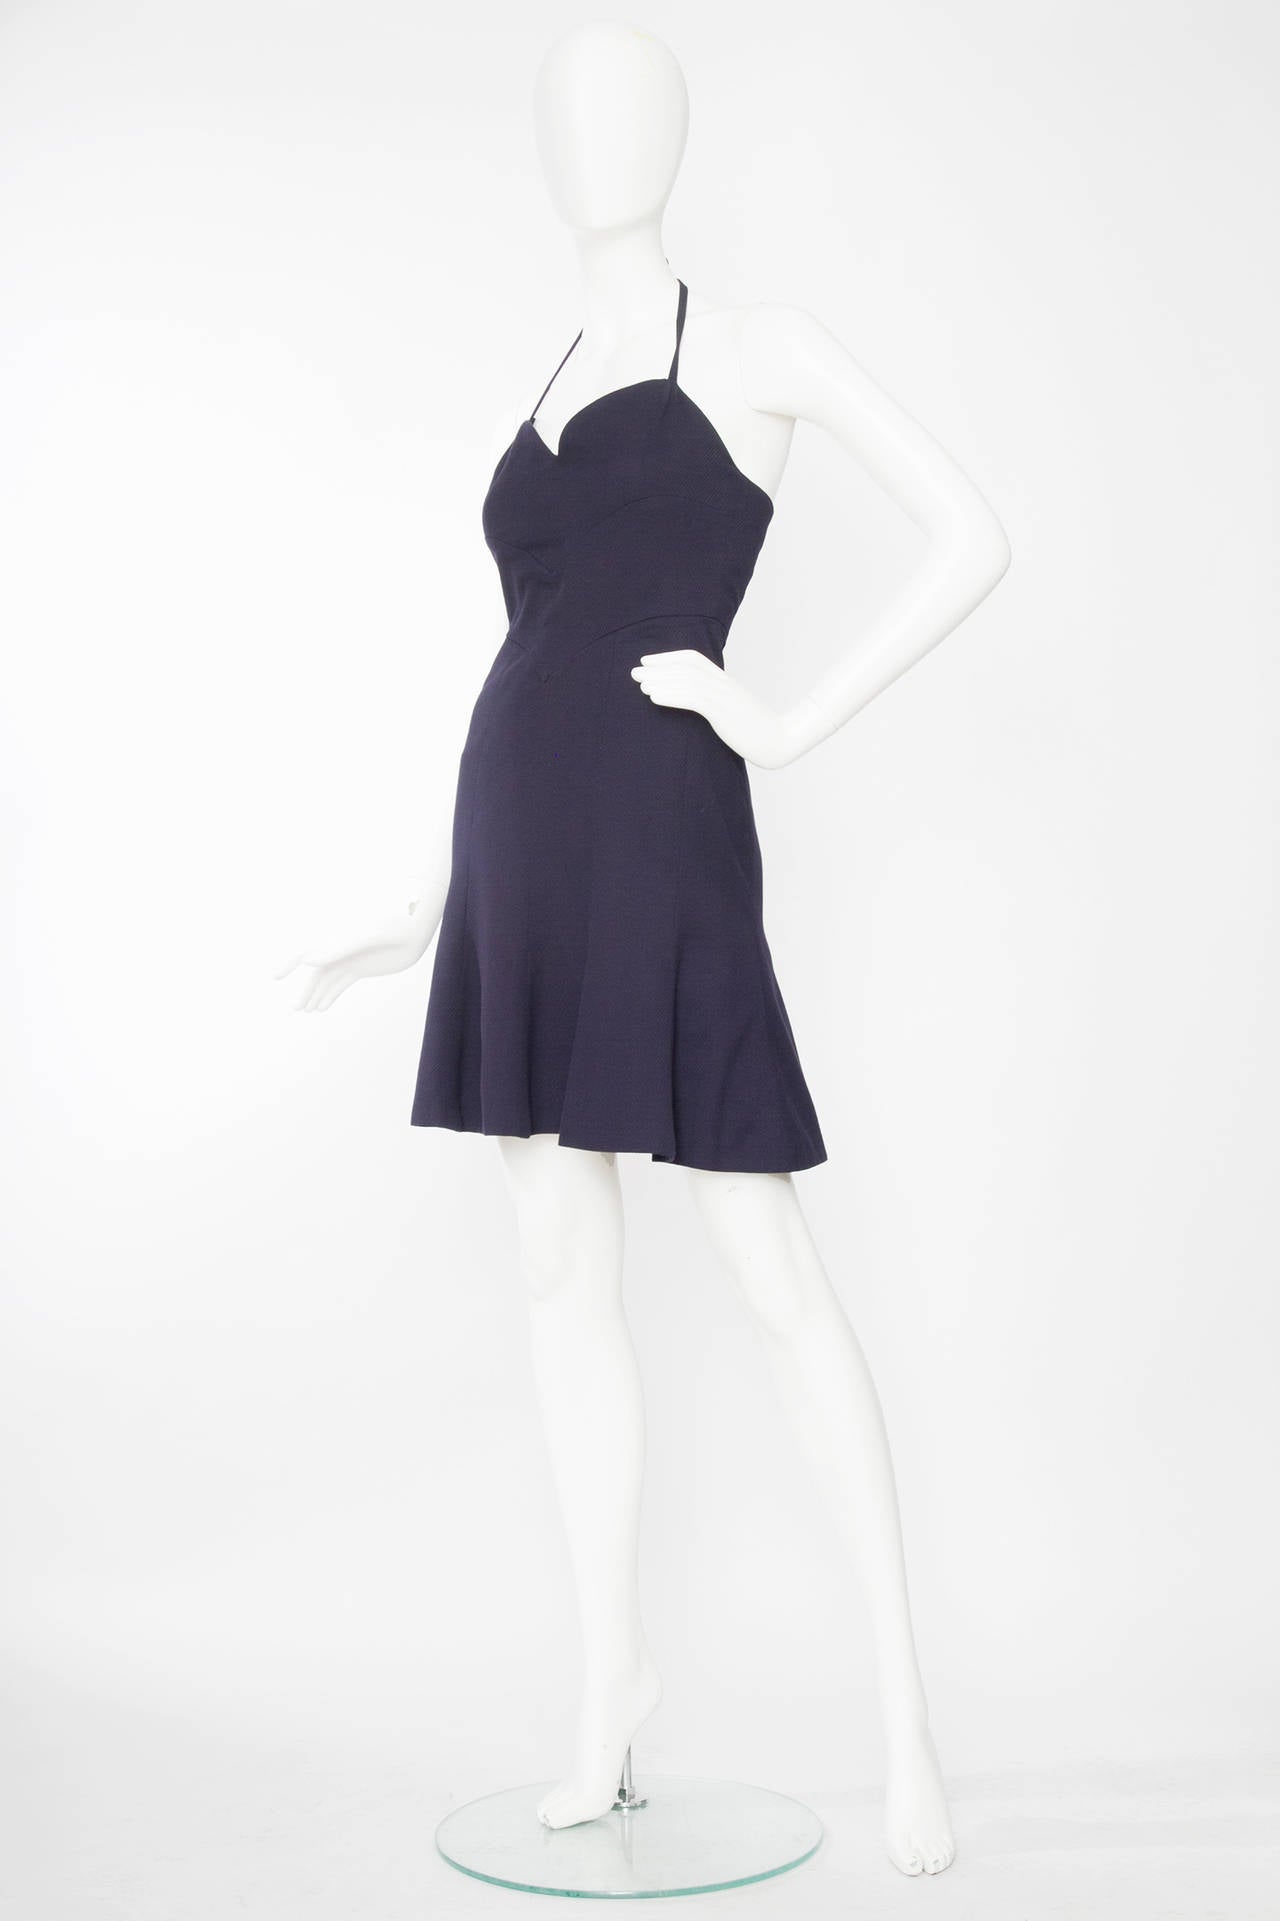 A flirty 1990s Chanel Boutique navy blue cotton dress with an adjustable strap halter-neck, The dress has a low cut front and a ruffle hemline. The dress closes in the back with a zipper closure. 

The size of the dress corresponds to a modern